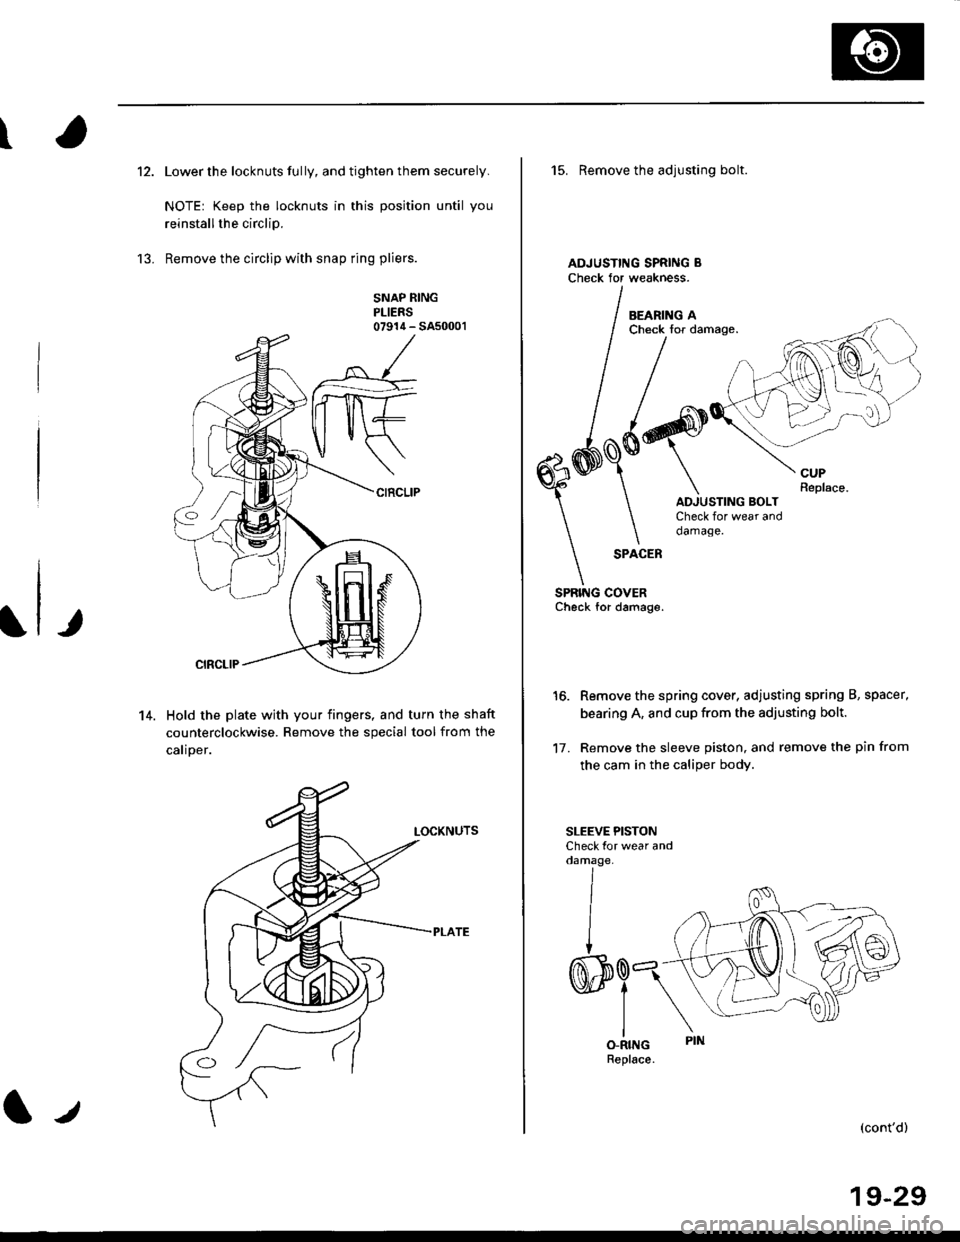 HONDA CIVIC 1997 6.G Manual Online \
13.
Lower the locknuts fully, and tighten them securely.
NOTE: Keep the locknuts in this position until you
reinstallthe circlip.
Remove the circlip with snap ring pliers.
SNAP RINGPLIERS07914 - SA5